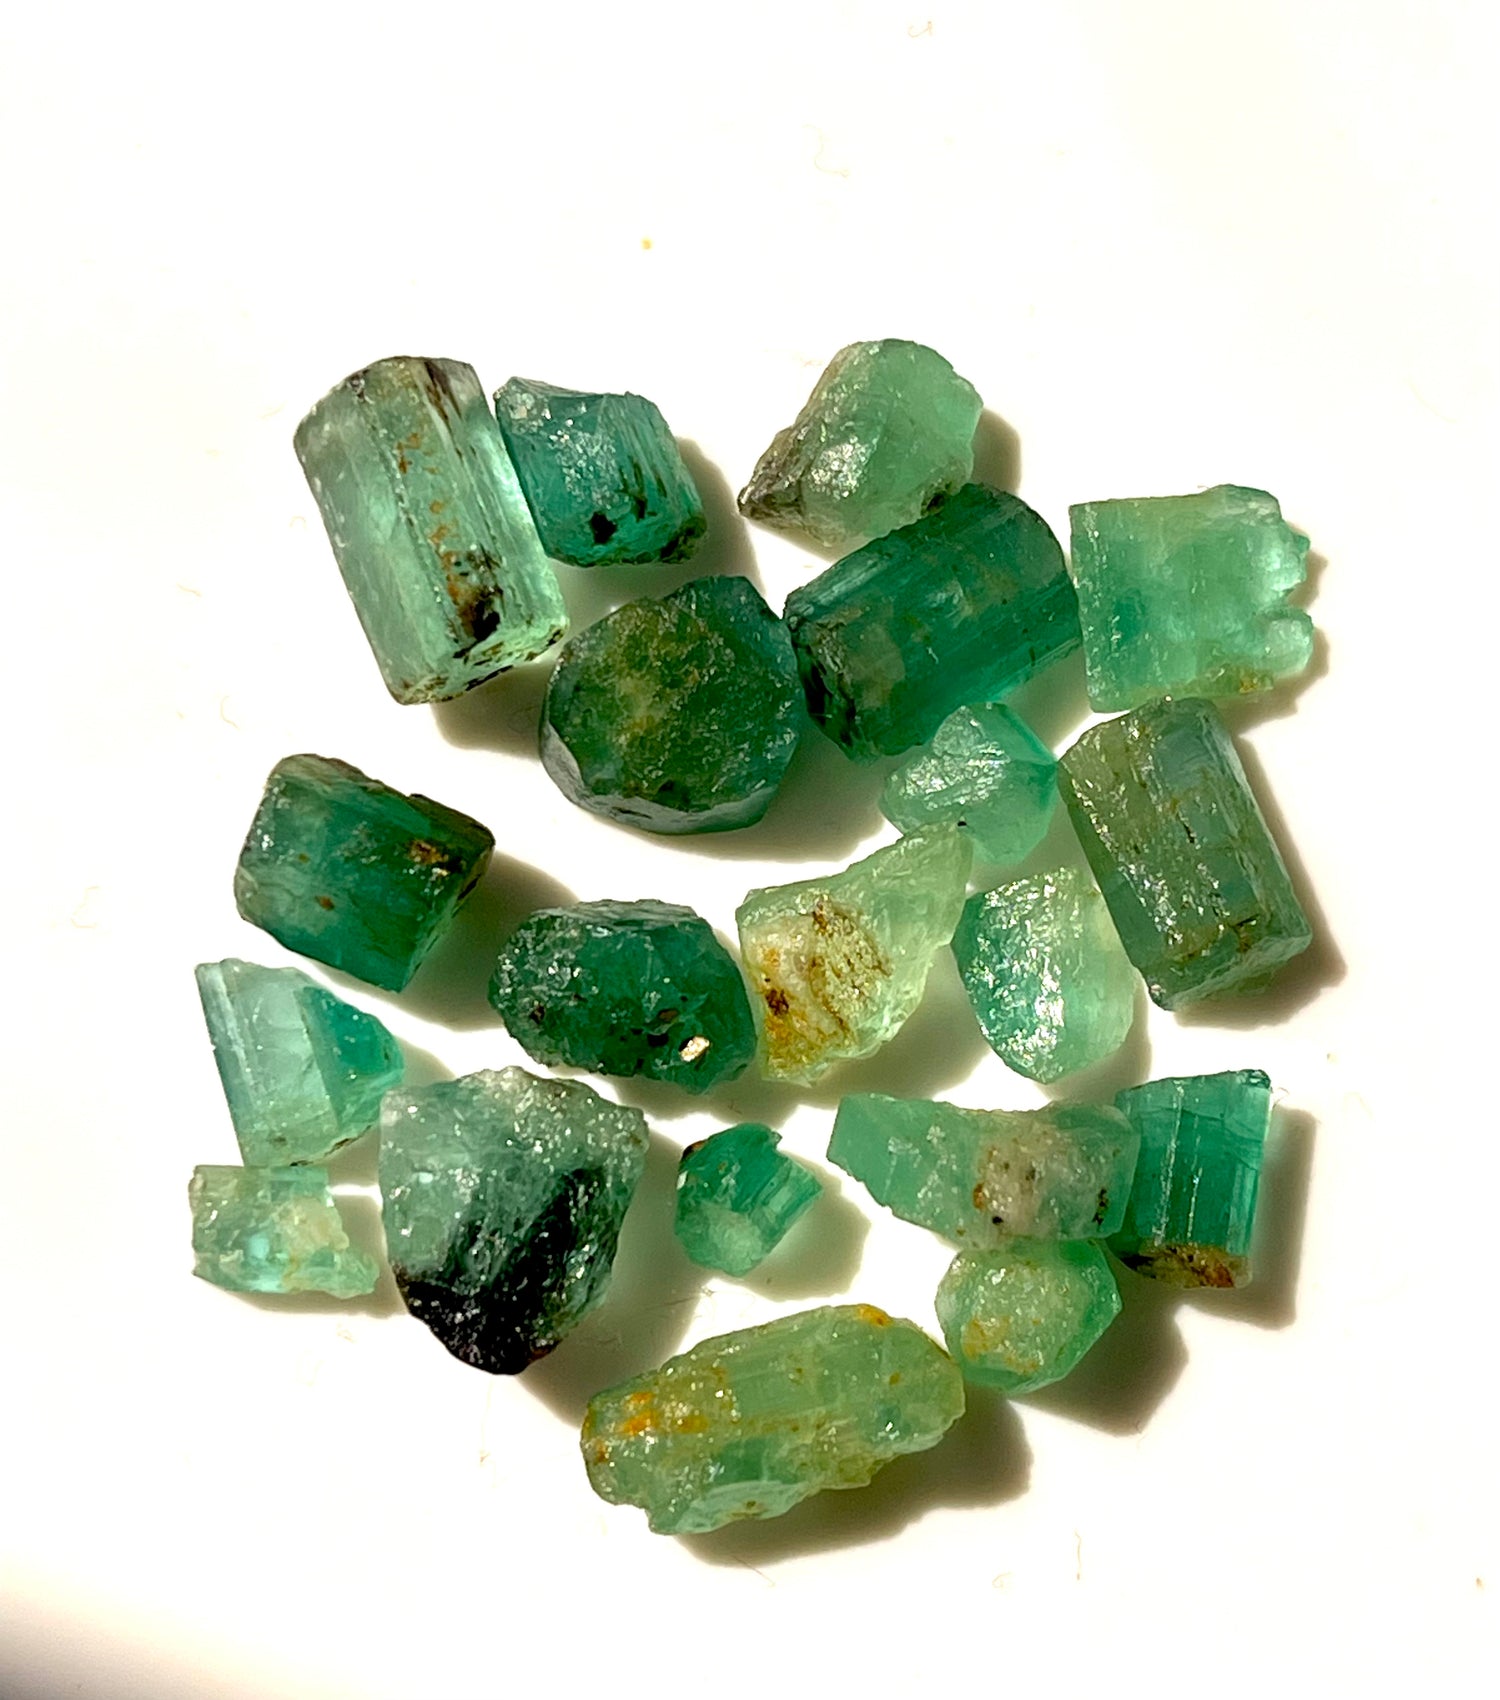 You May Like This Emerald Stones.